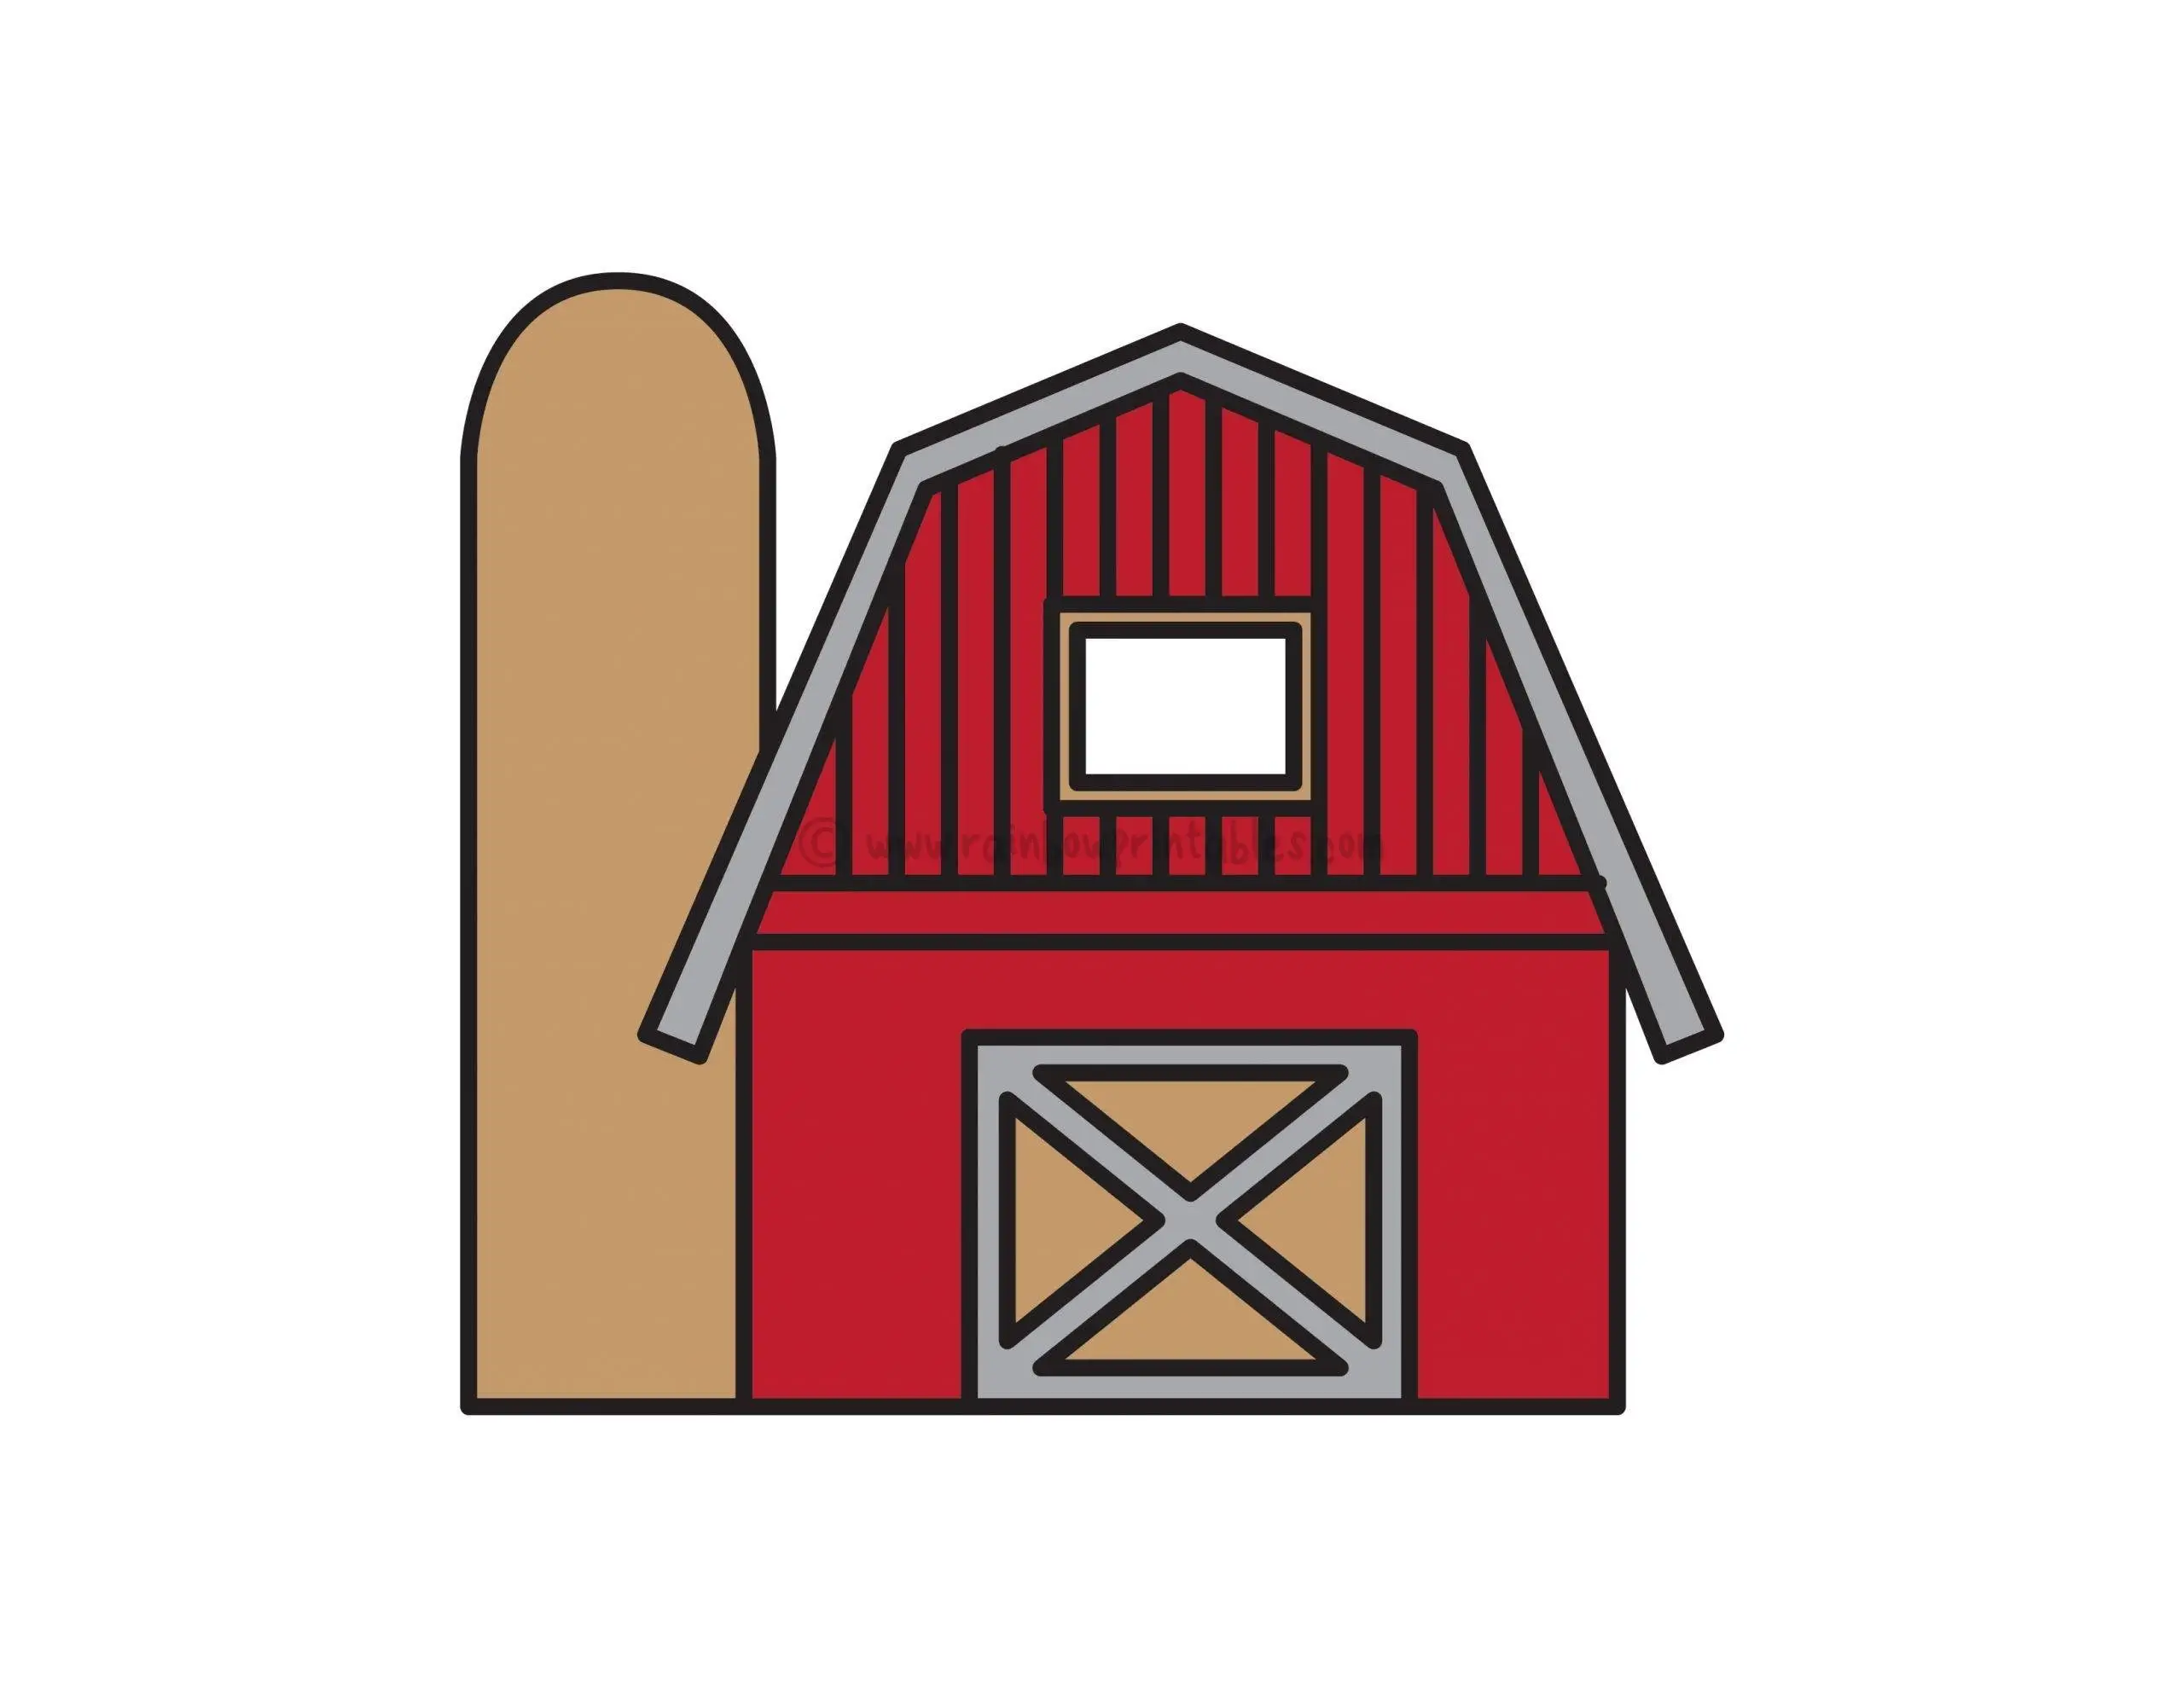 How To Draw a Big Red Barn – Easy Farming Doodles for Kids